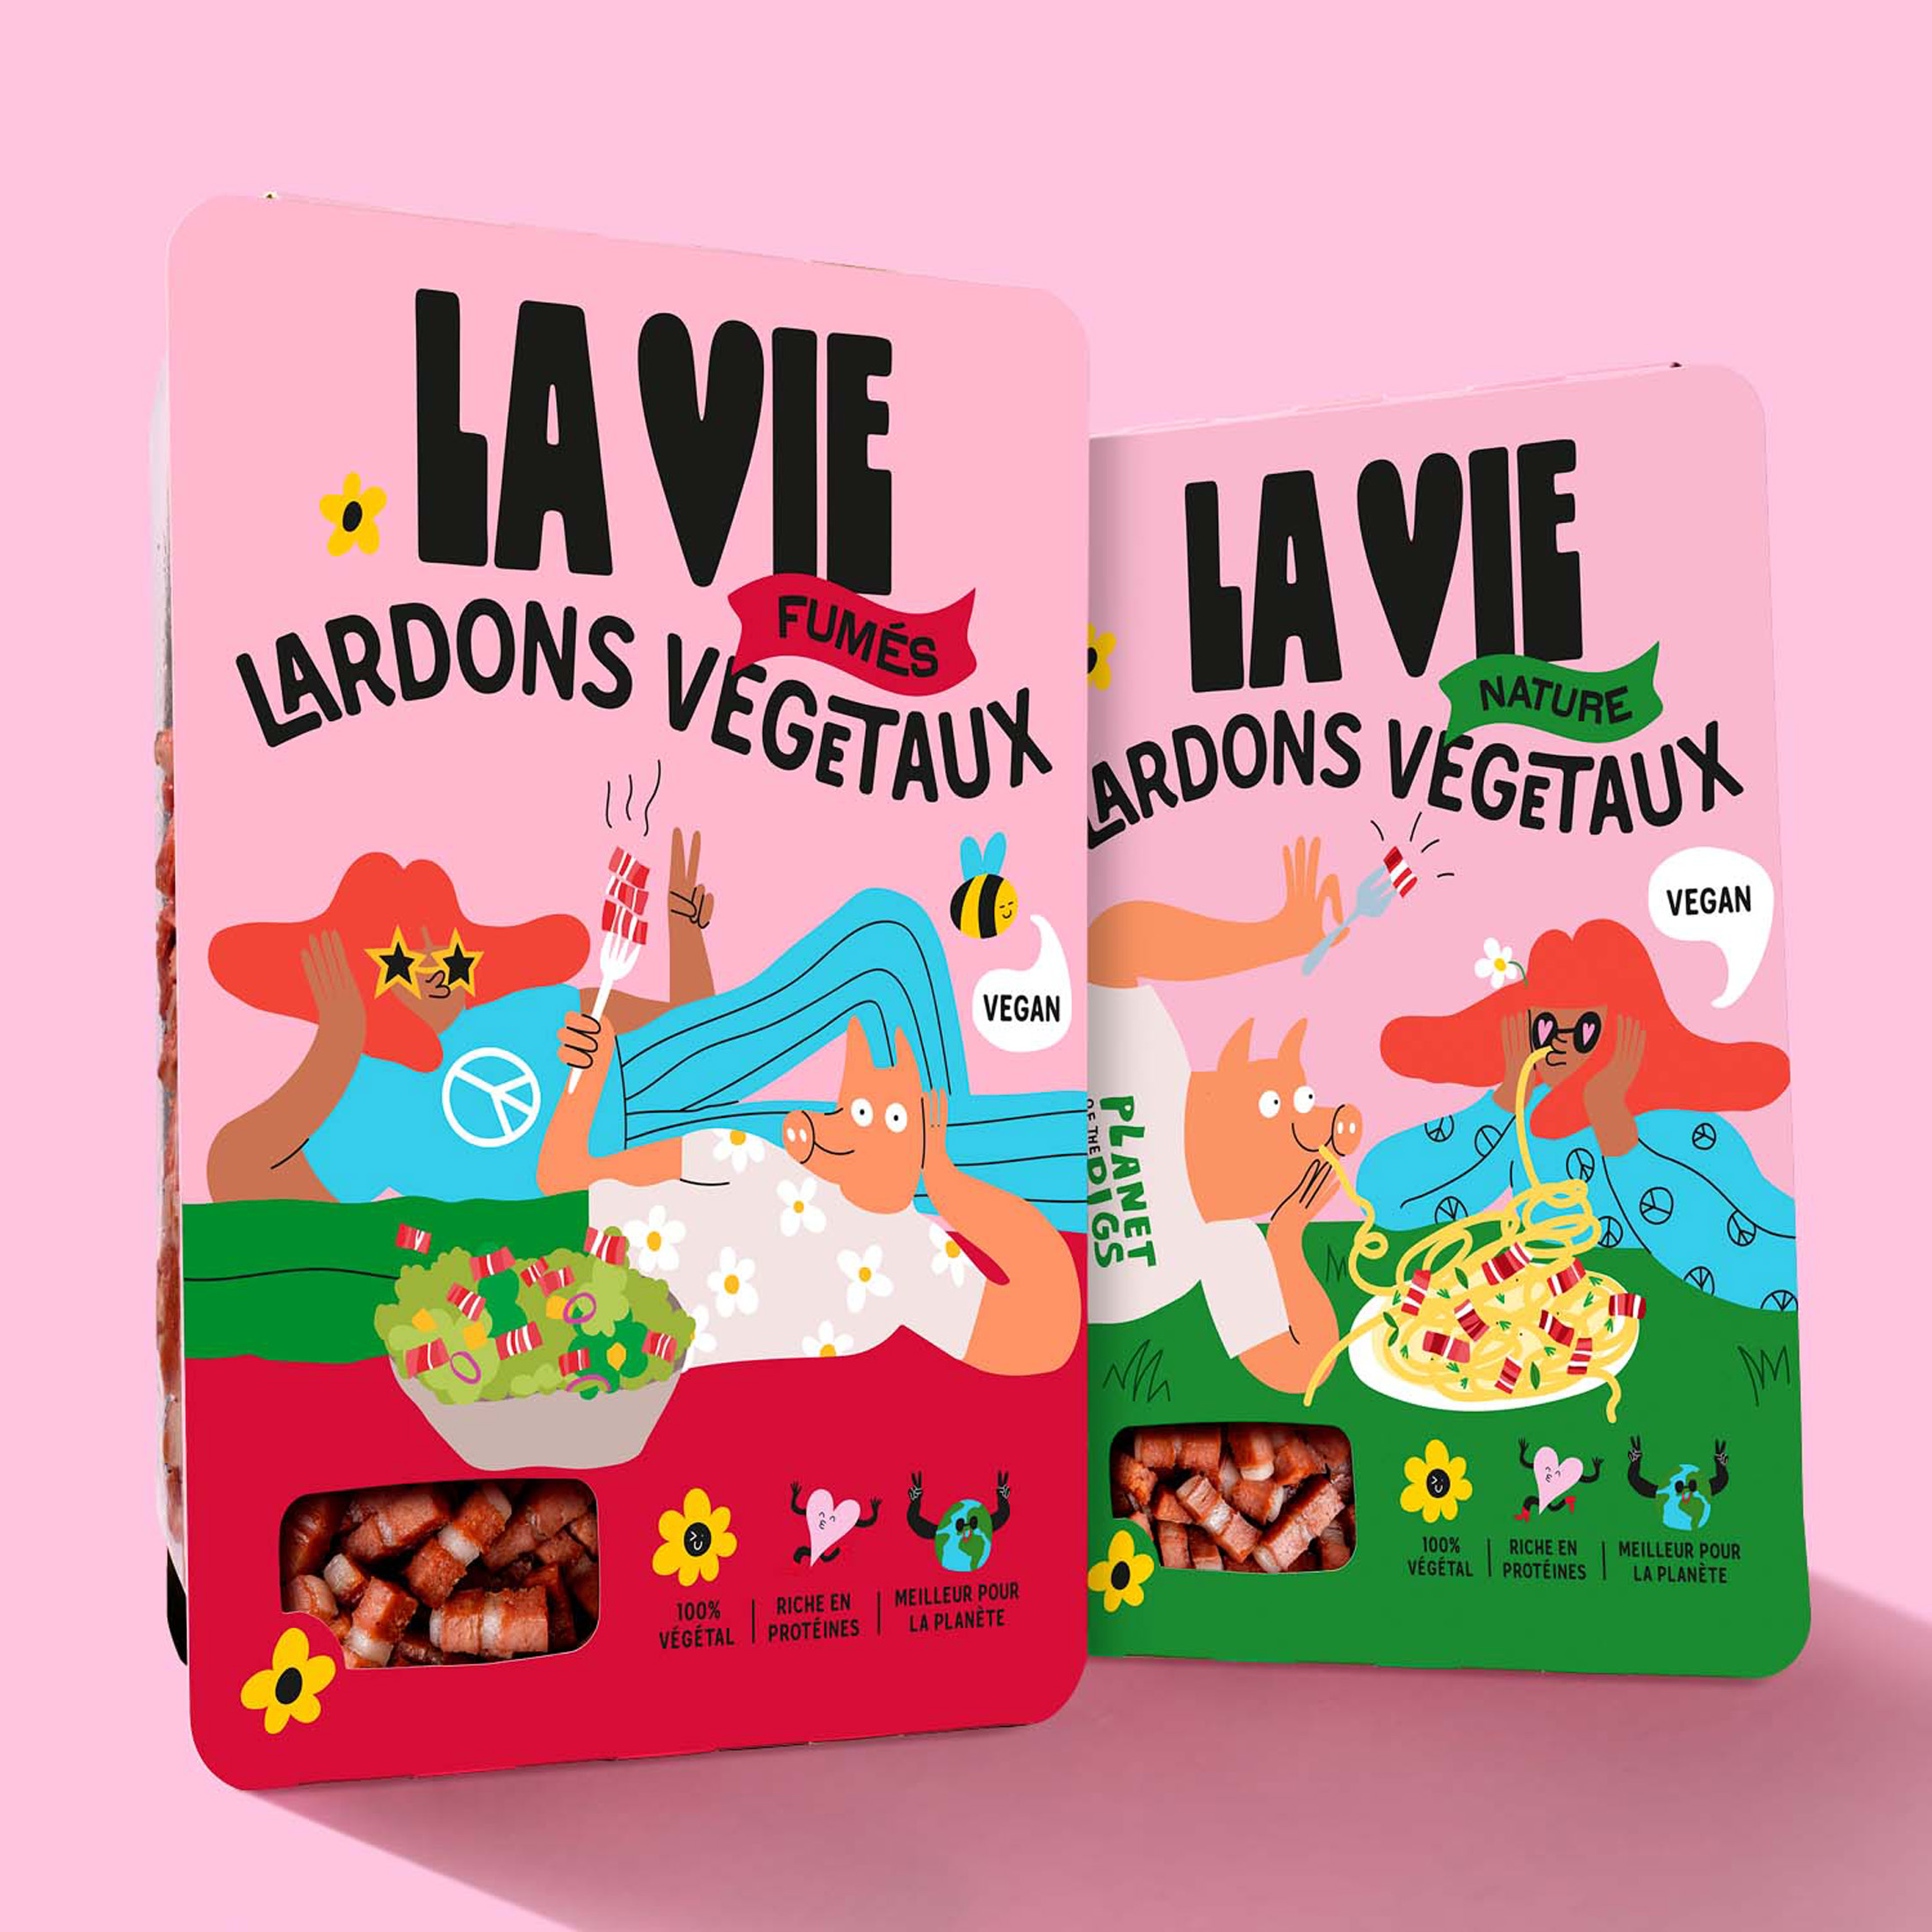 From Plants With Love, Brand and Packaging Design by Everland